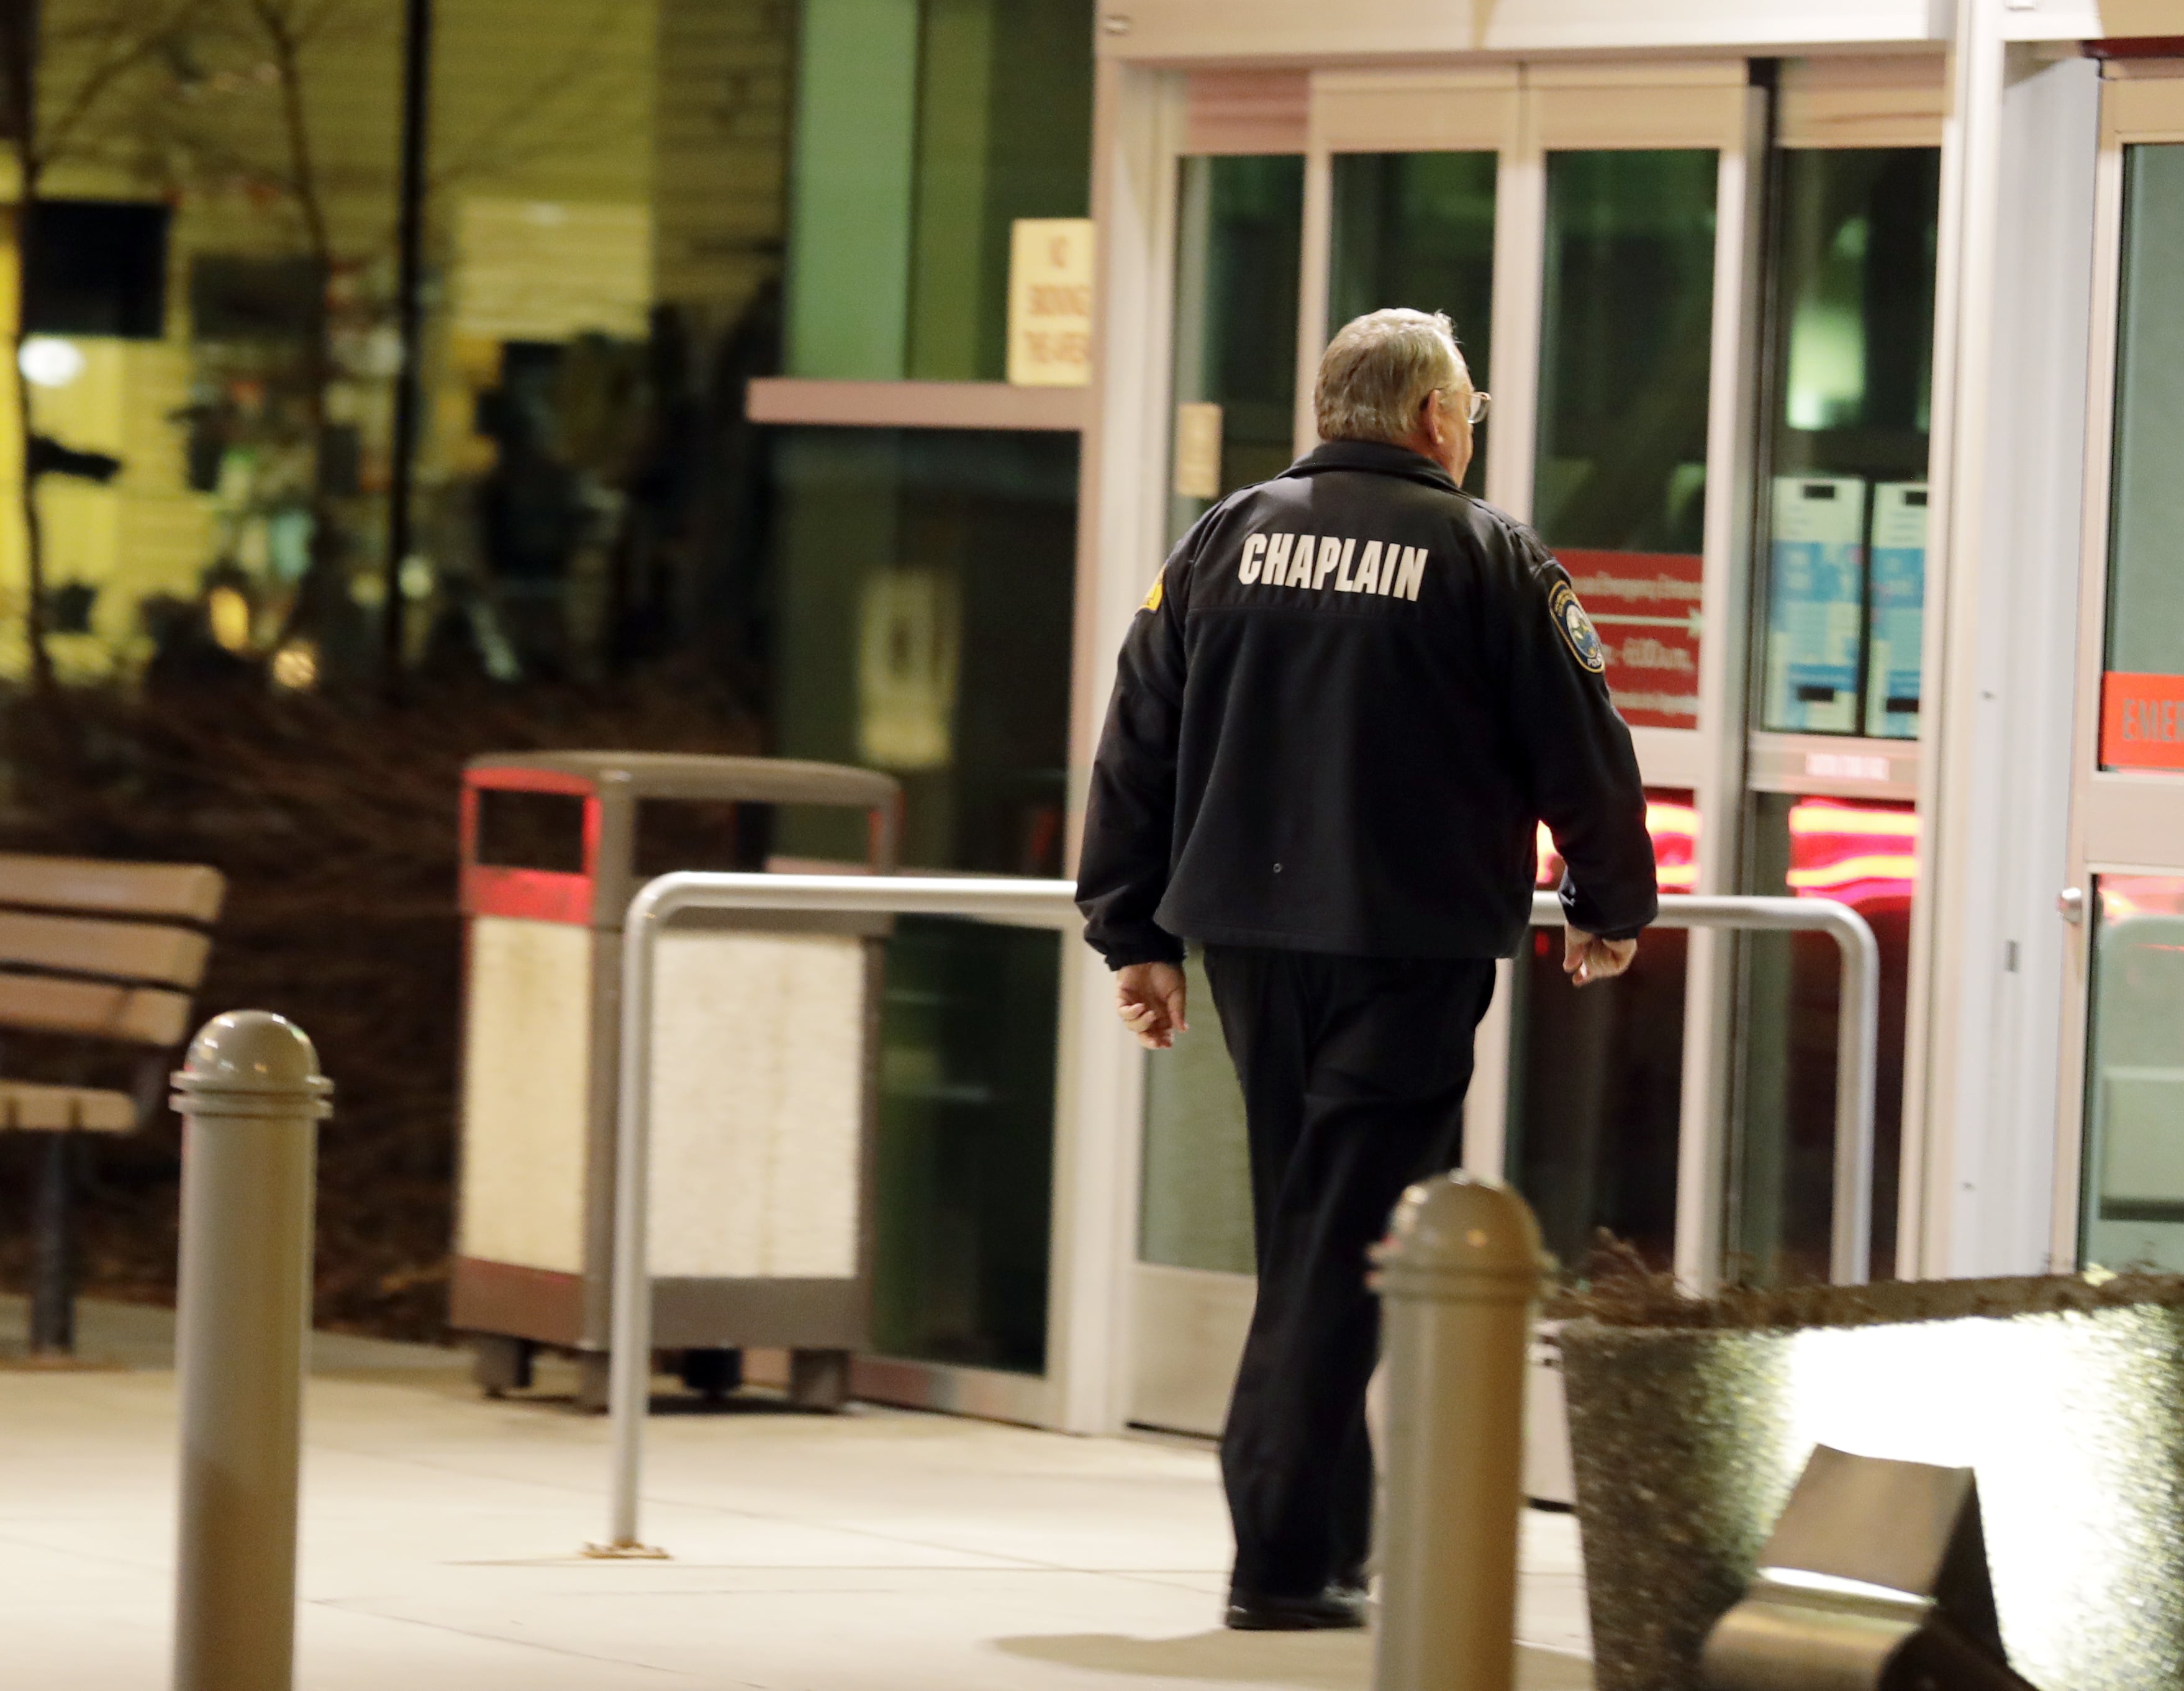 A law enforcement chaplain walks into Kittitas Valley Healthcare Hospital, in the late night hours of Tuesday, March 19, 2019, in Ellensburg, Wash., prior to a procession to accompany the body of a Kittitas County Sheriff's deputy away from the hospital. A Kittitas County Sheriff's deputy was killed and a police officer was injured after an exchange of gunfire during an attempted traffic stop. (AP Photo/Ted S.